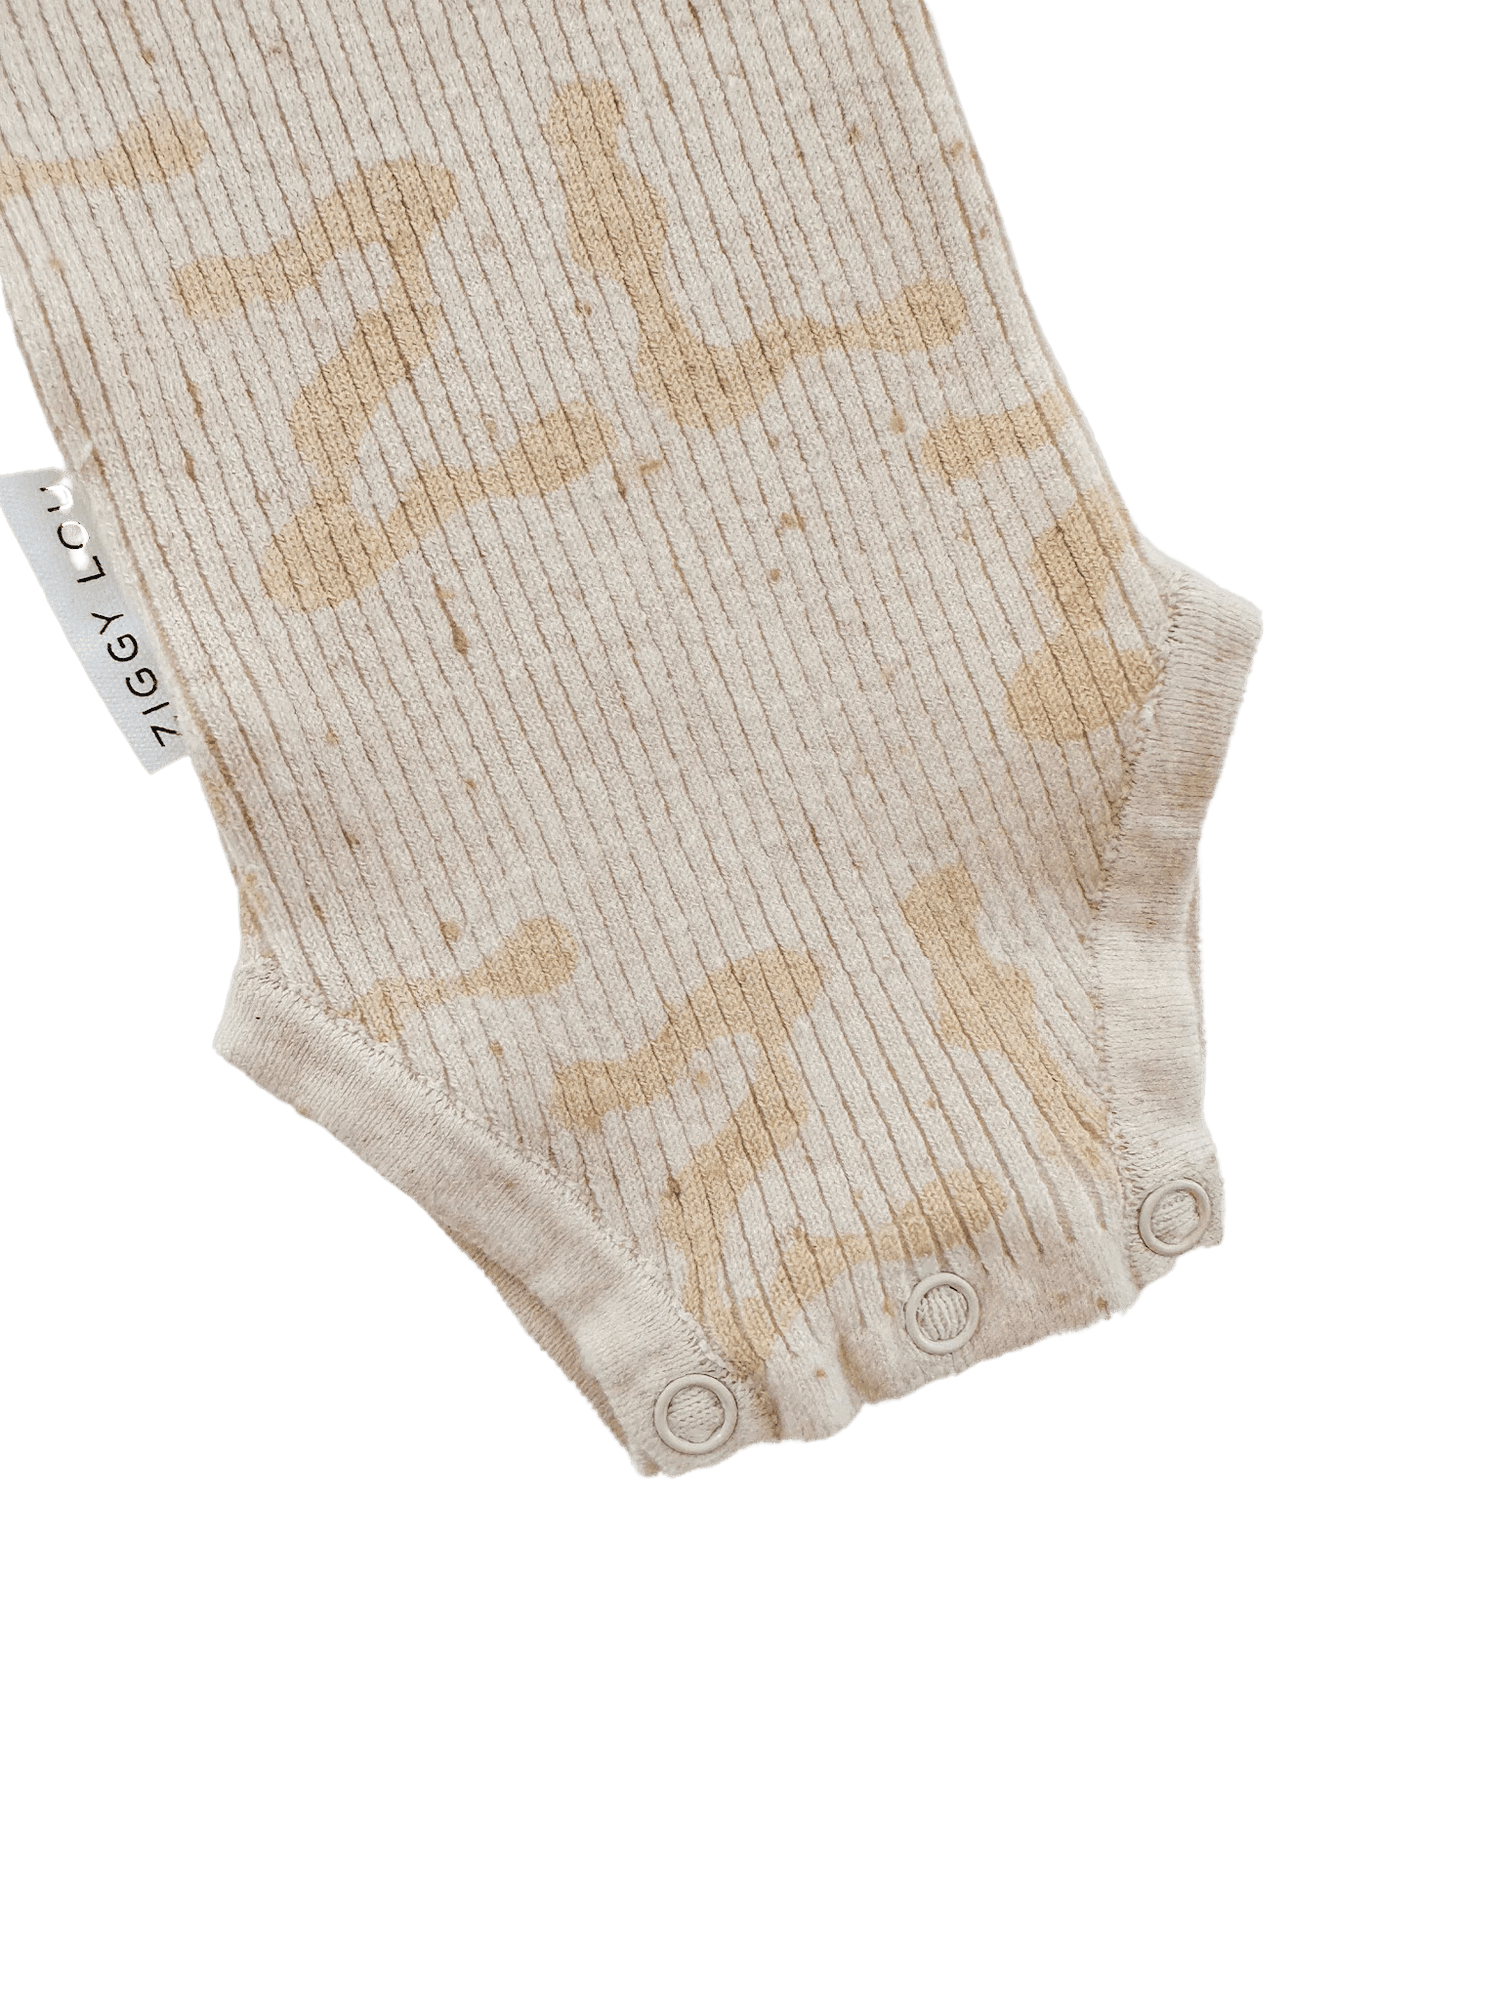 ZIGGY LOU | SUMMER RIBBED BODYSUIT - ZL NB by ZIGGY LOU - The Playful Collective